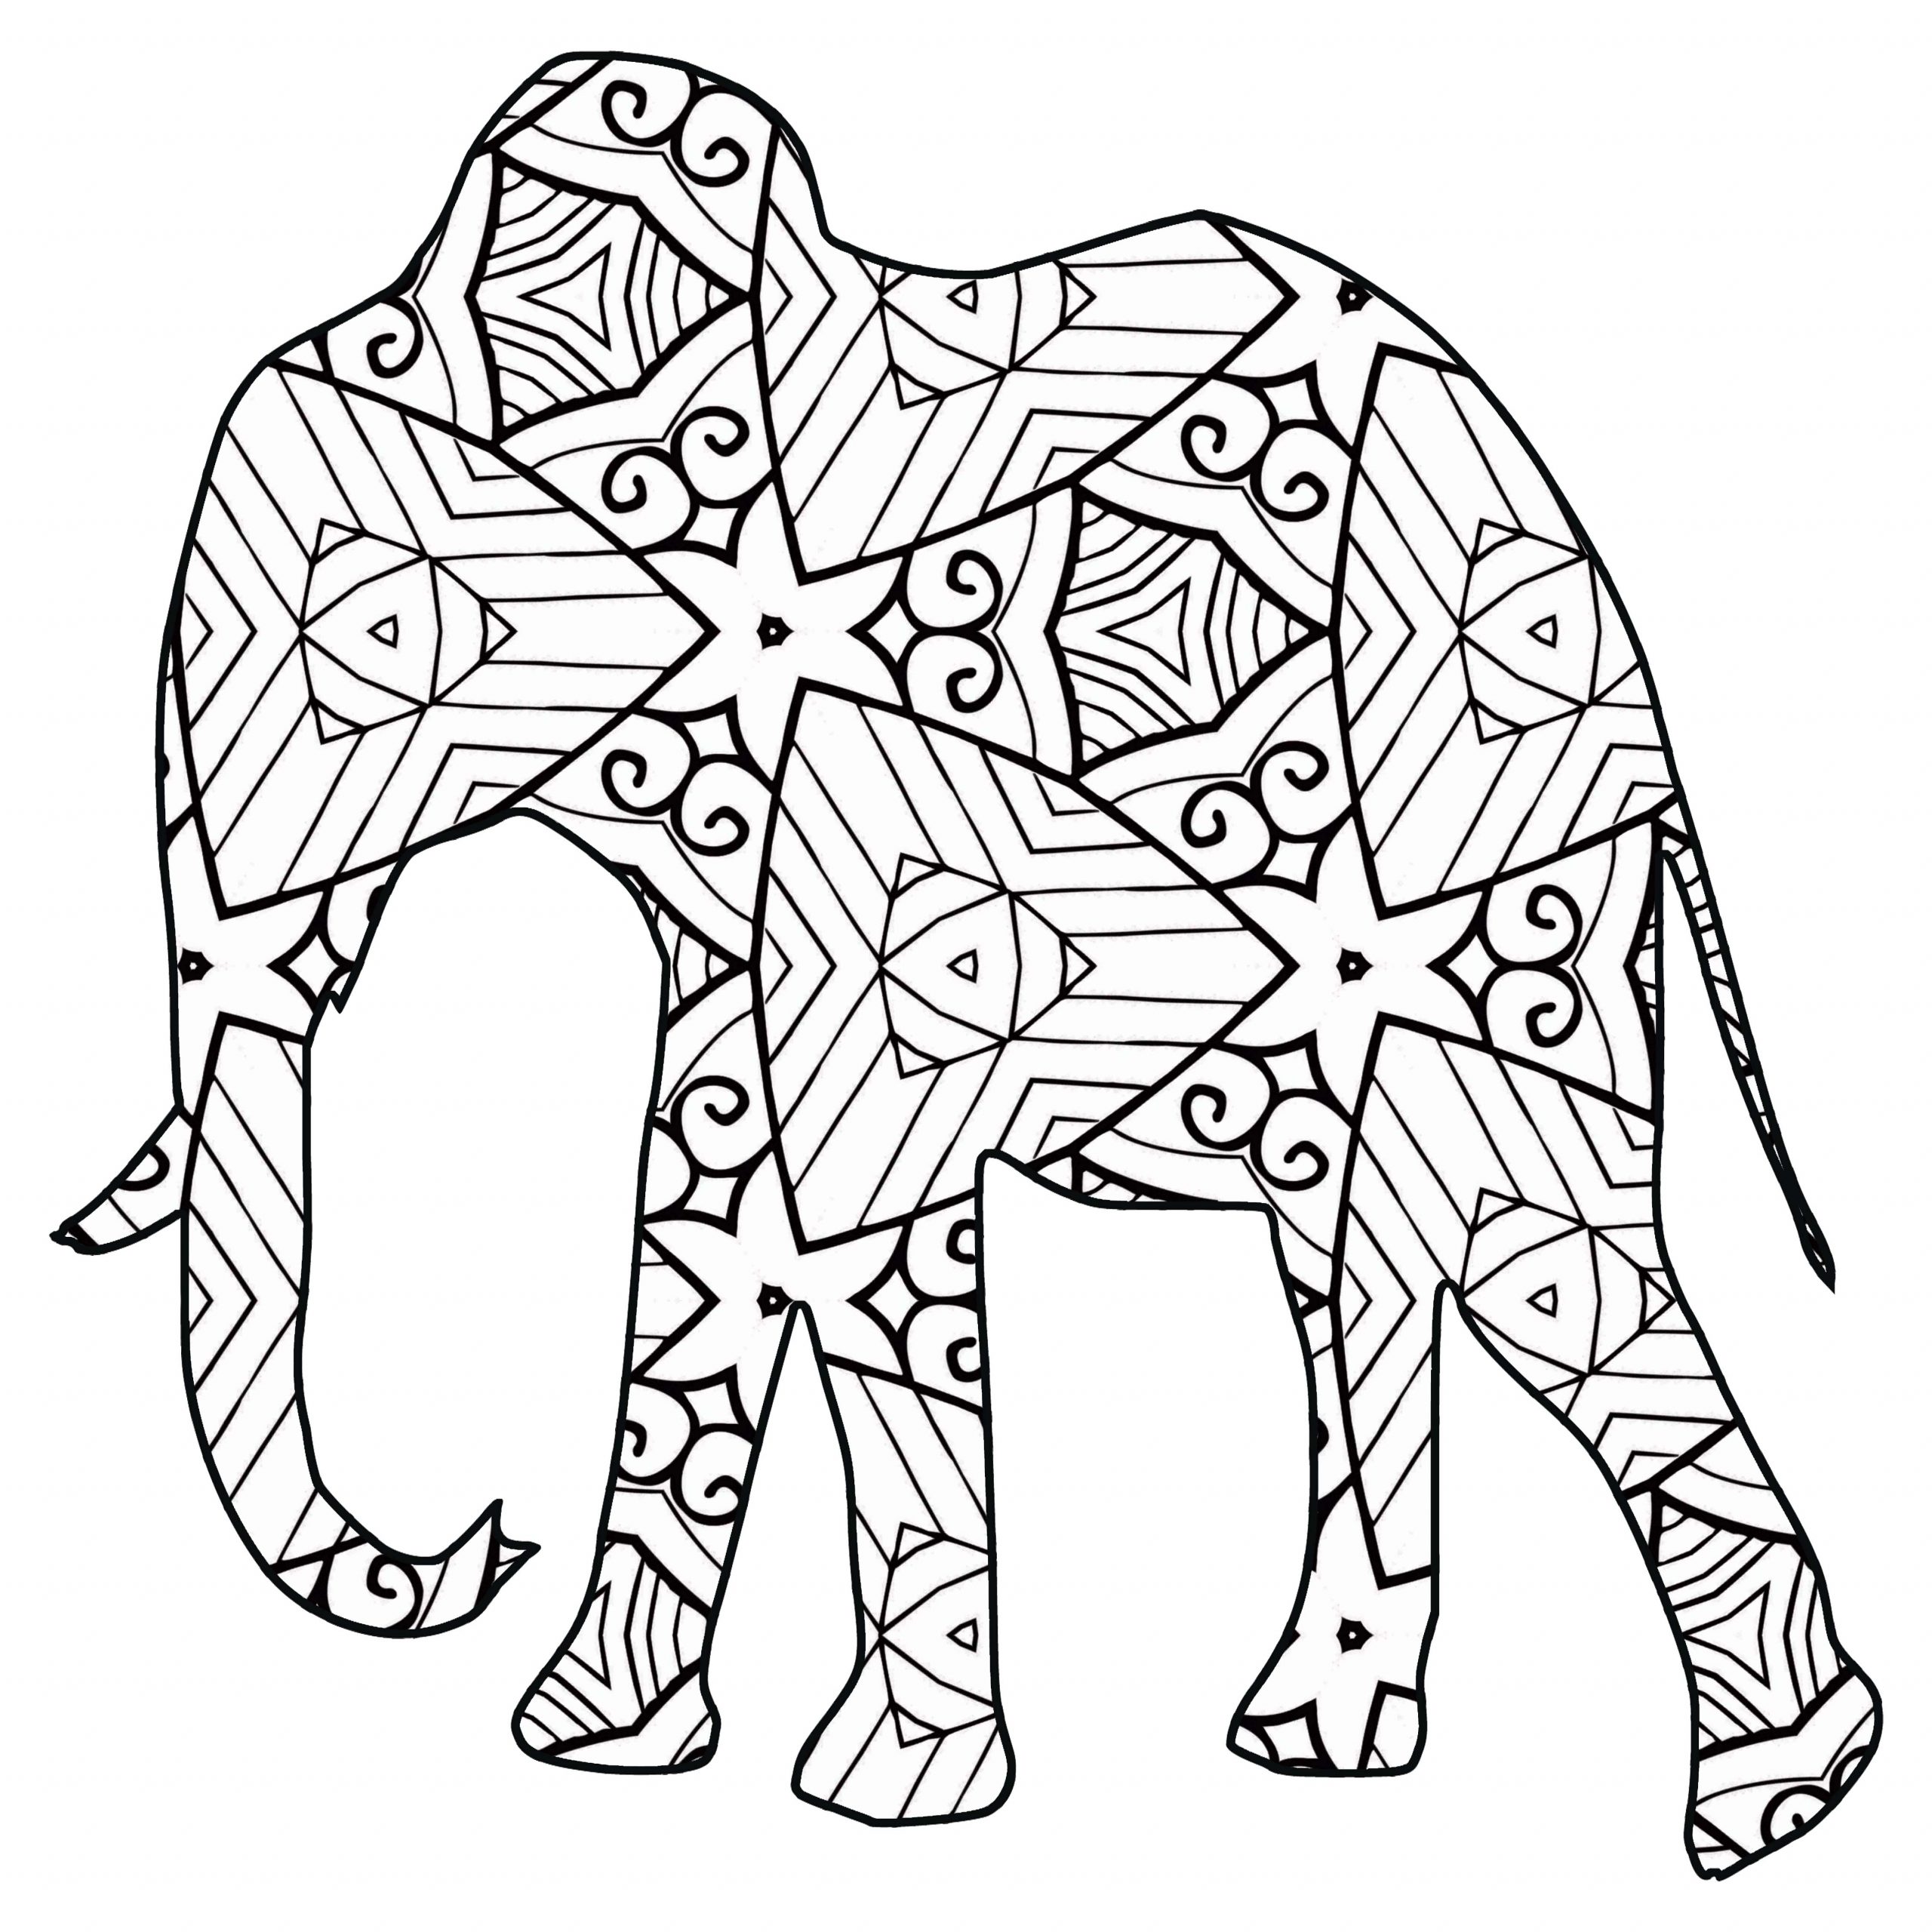 Coloring Pages : Coloring Staggering Animal Photo For Adults Free ...